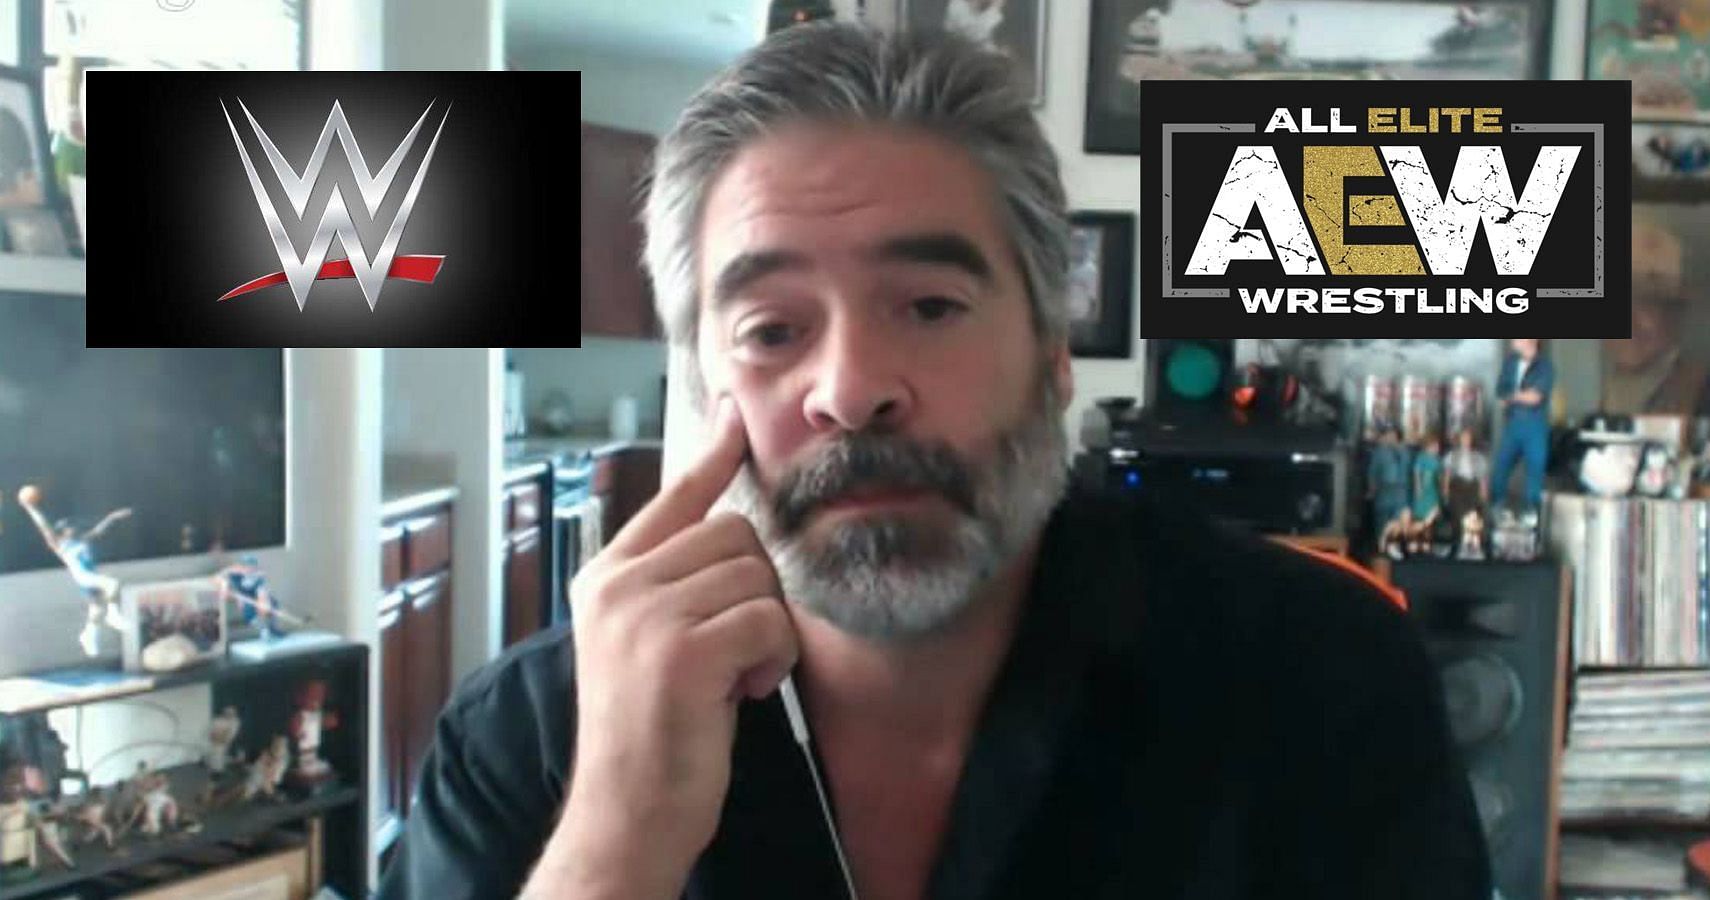 Vince Russo gives an insight into ratings